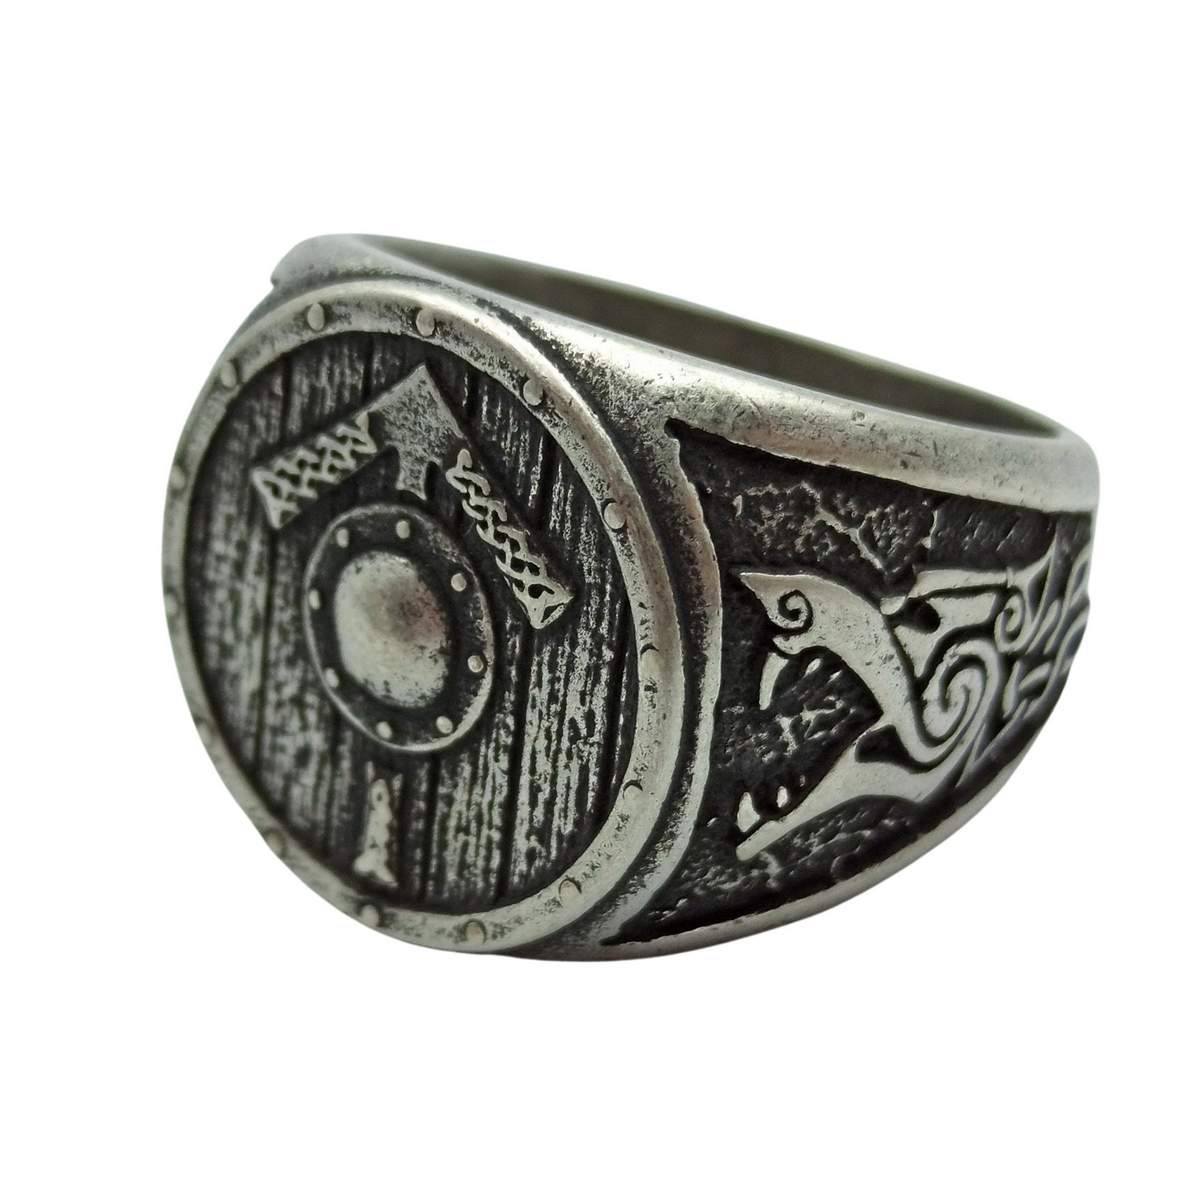 Tiwaz rune shield ring from bronze 6 US Silver plating 